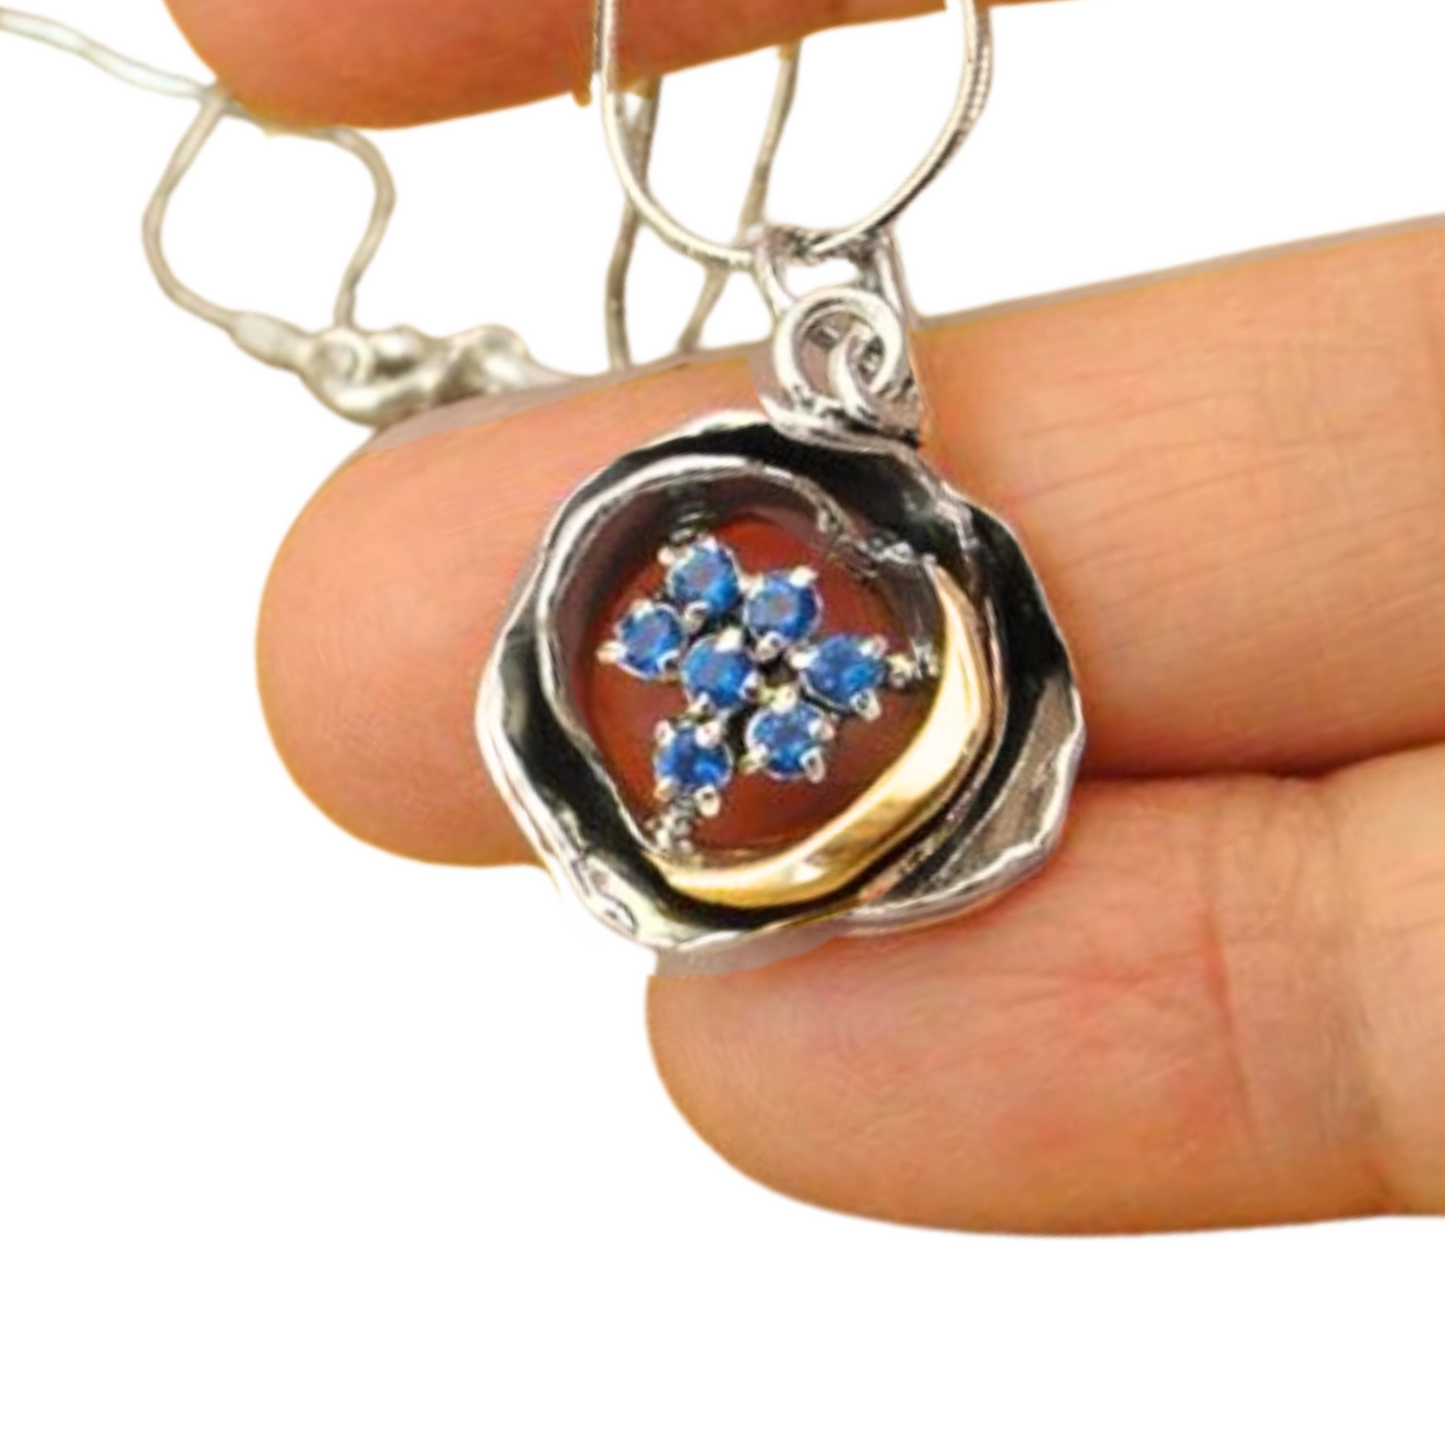 Rose shape silver & Gold Pendant decorated with white Blue CZ gemstone.